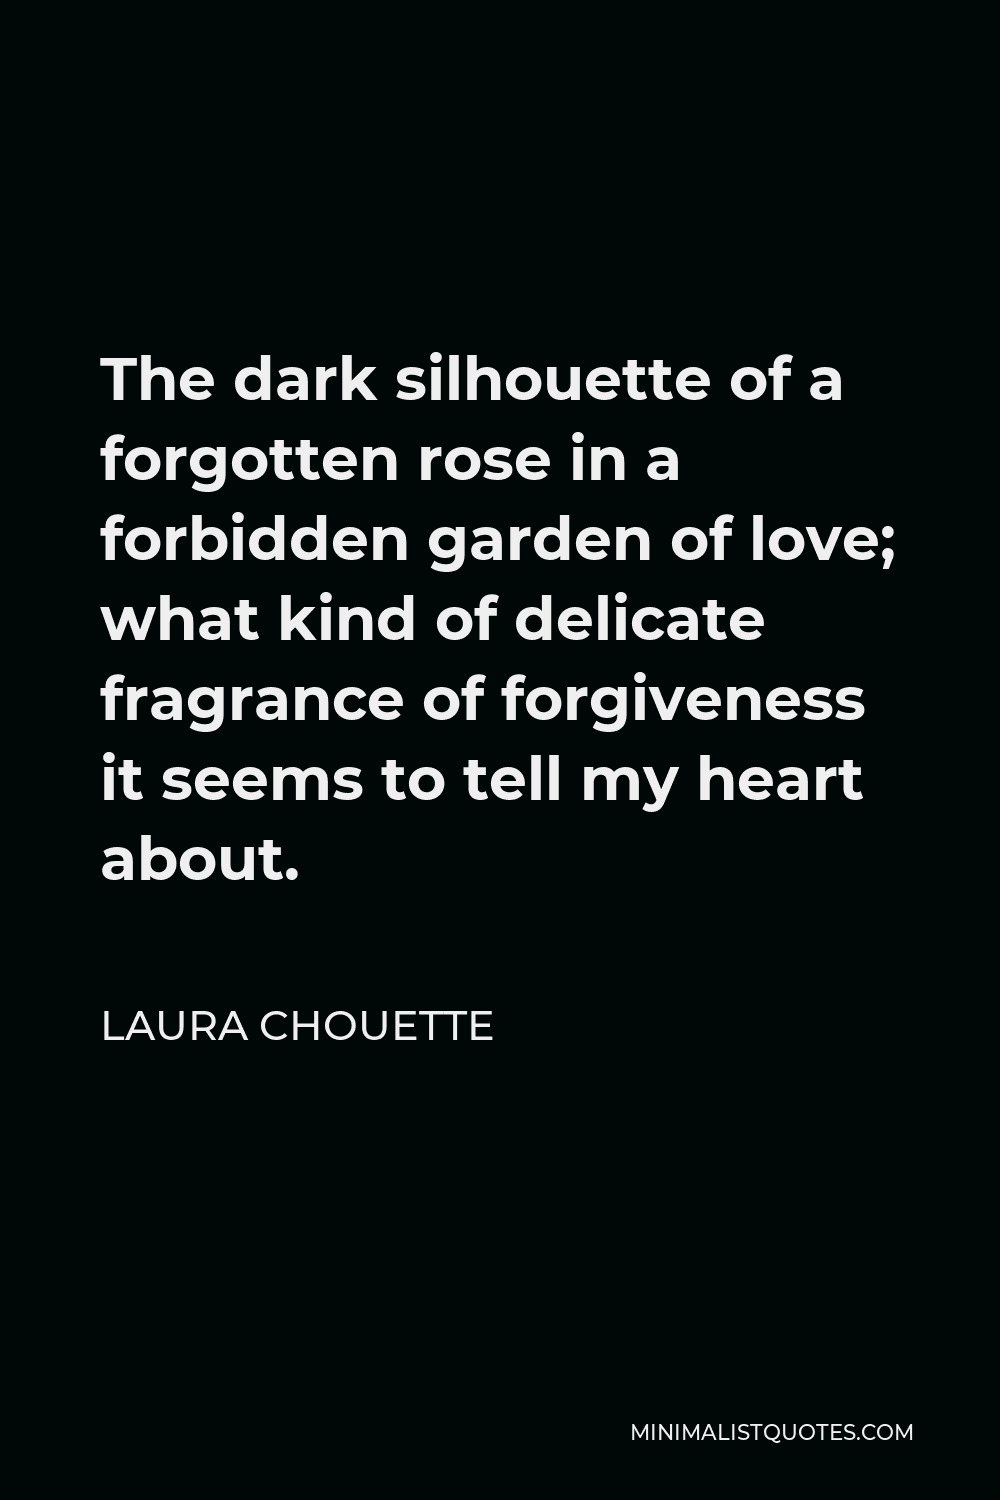 Laura Chouette Quote - The dark silhouette of a forgotten rose in a forbidden garden of love; what kind of delicate fragrance of forgiveness it seems to tell my heart about.